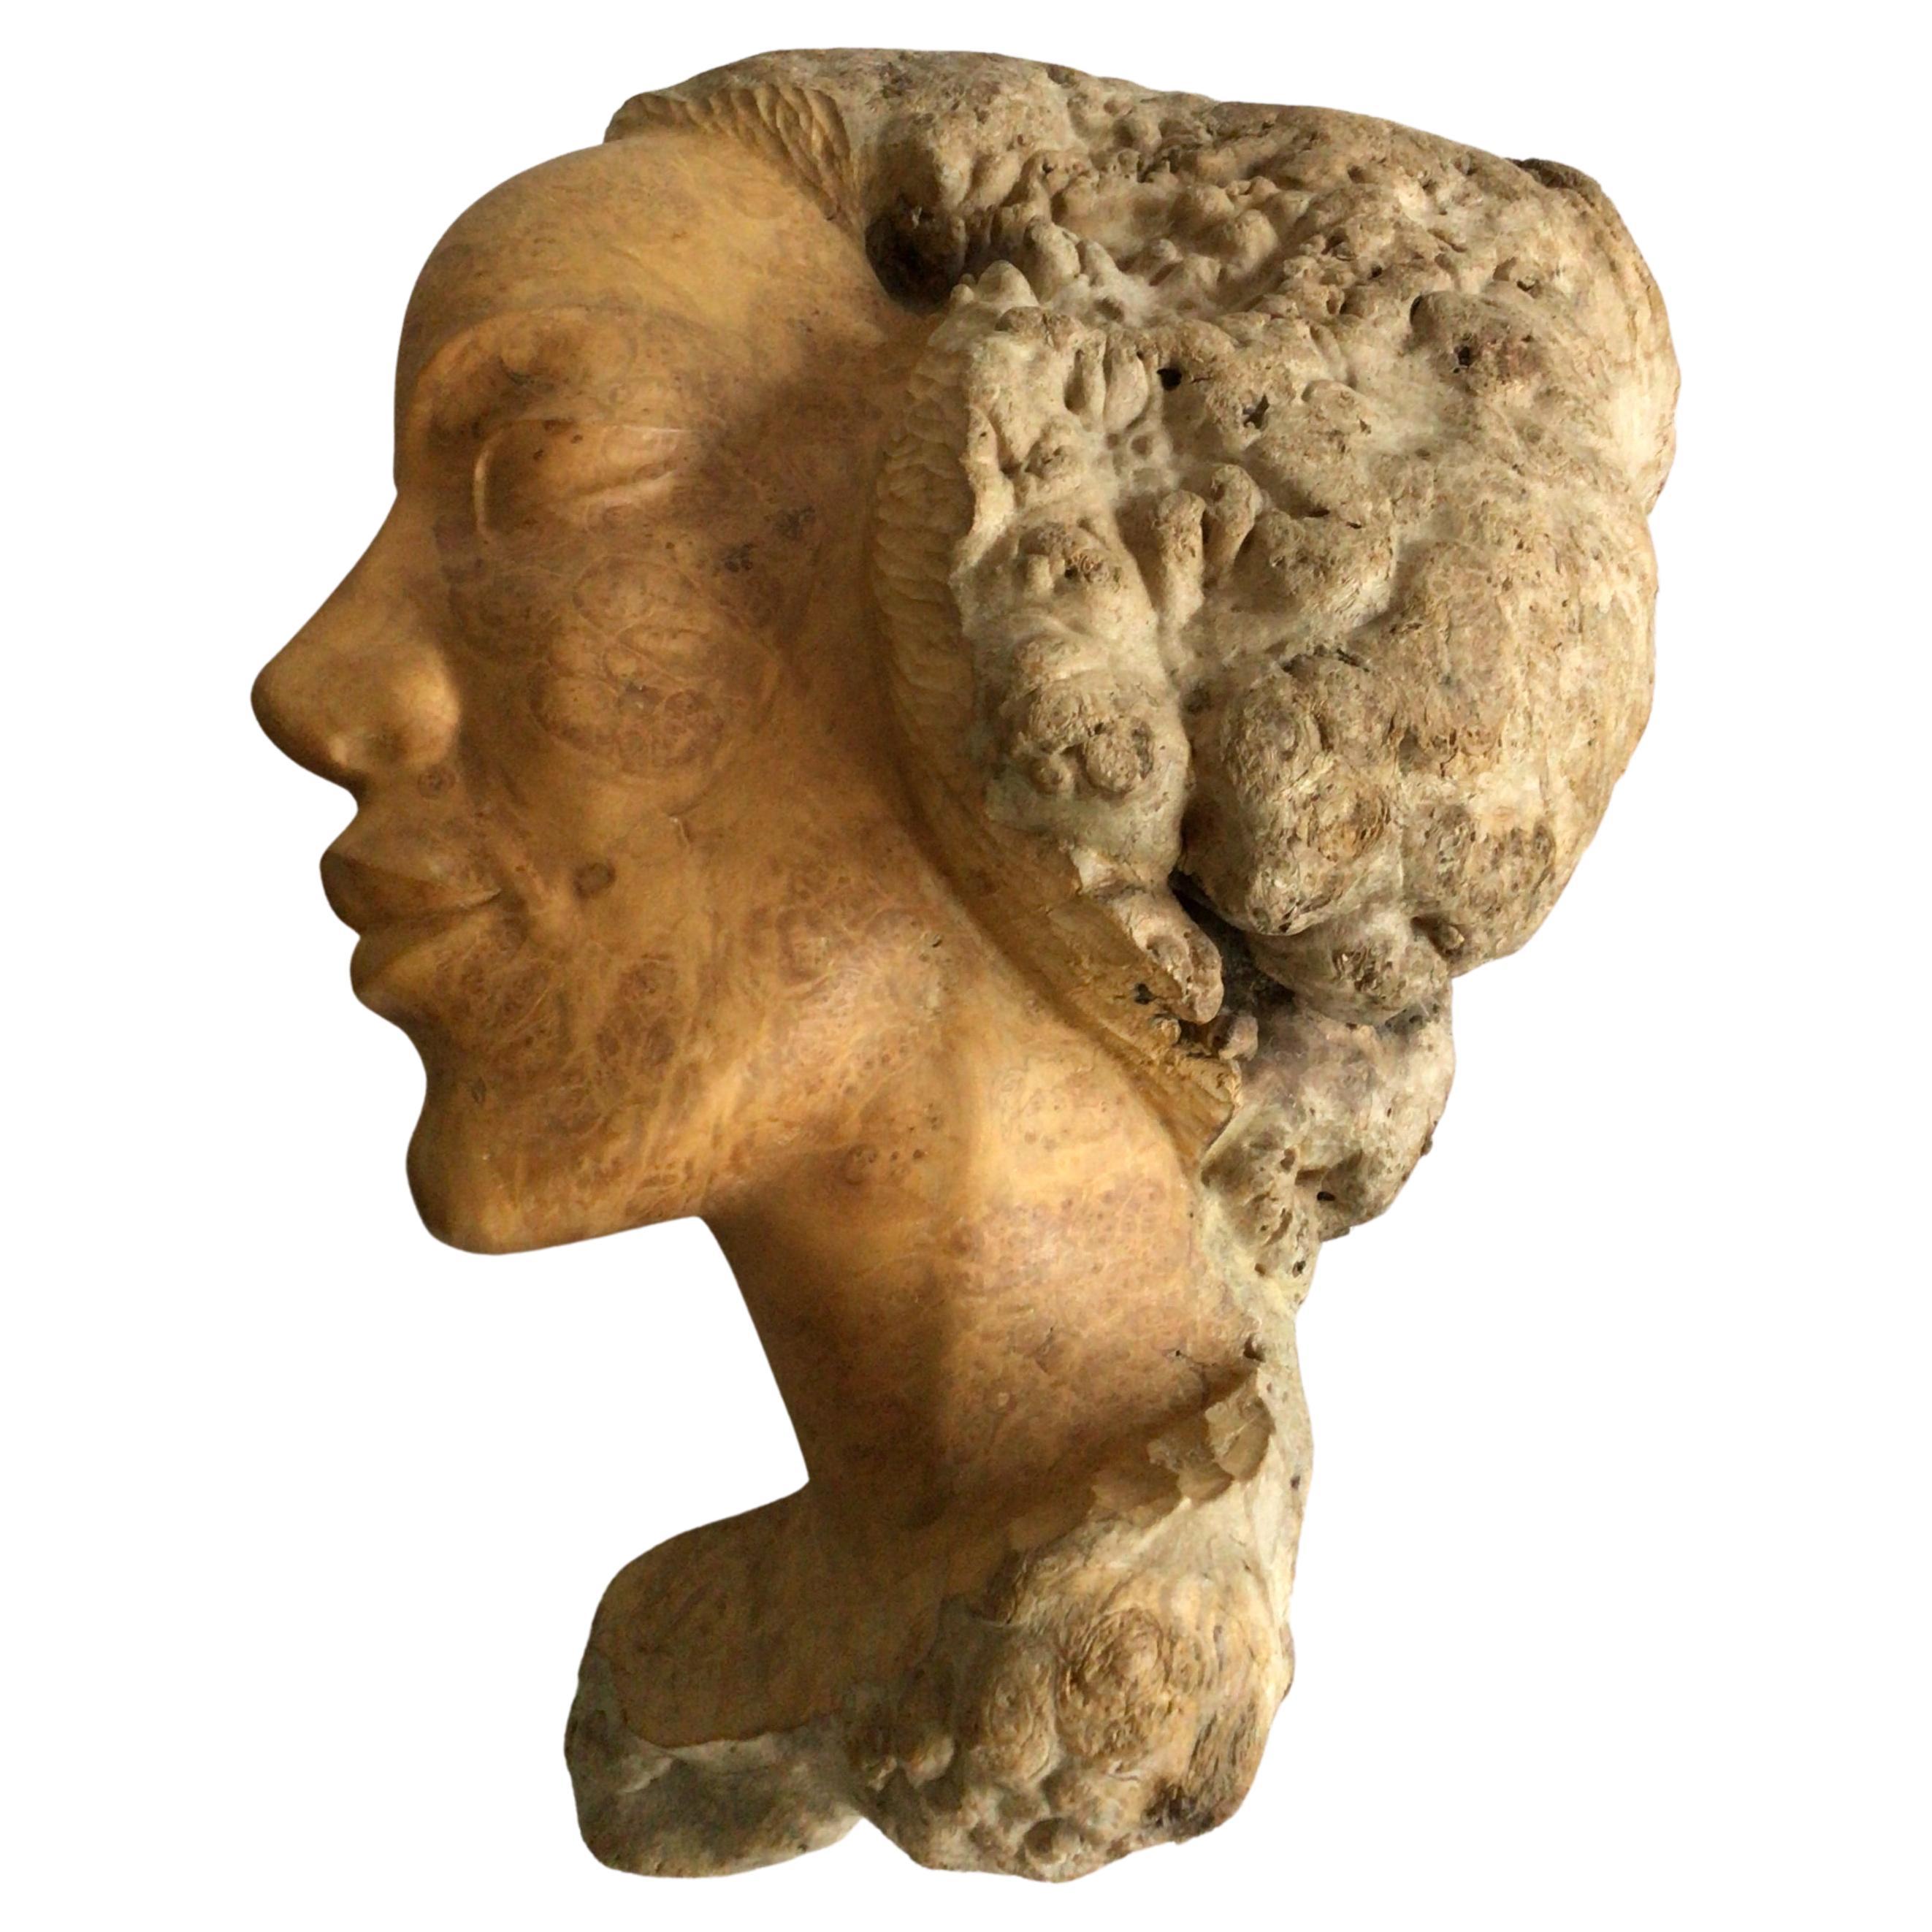 1960s Burl Wood Carving of A Woman's Face